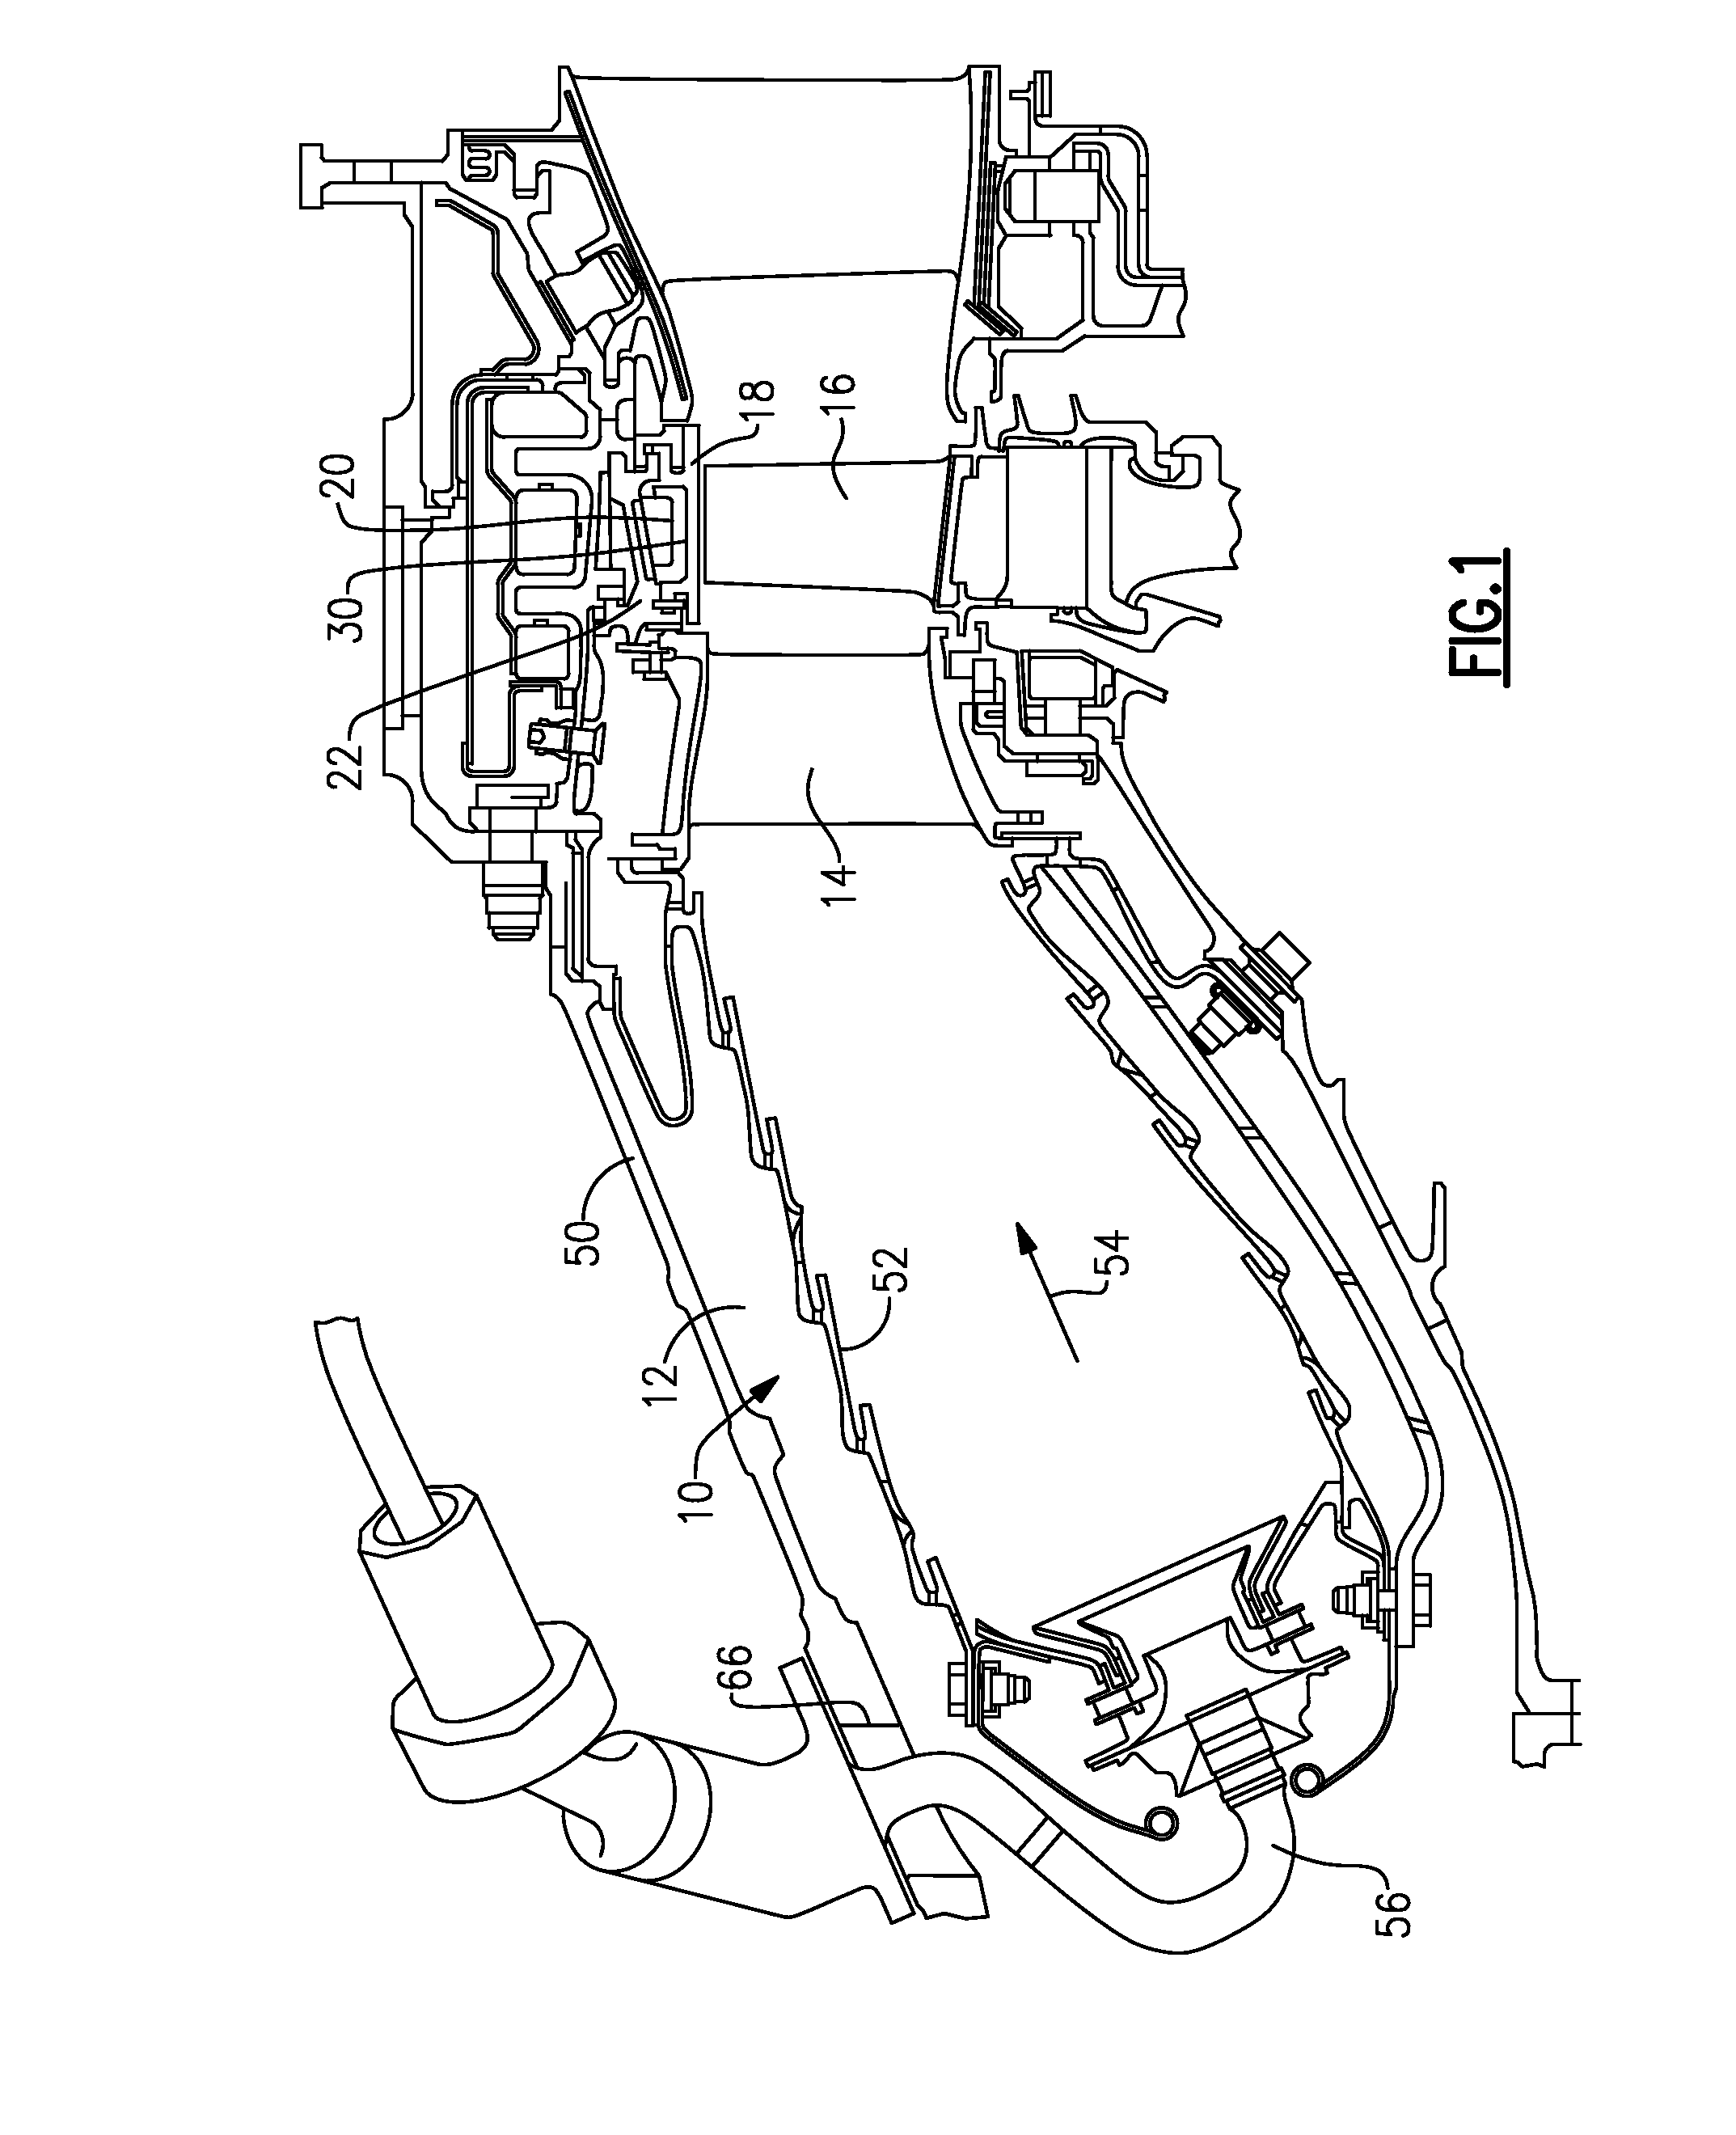 Detergent delivery methods and systems for turbine engines